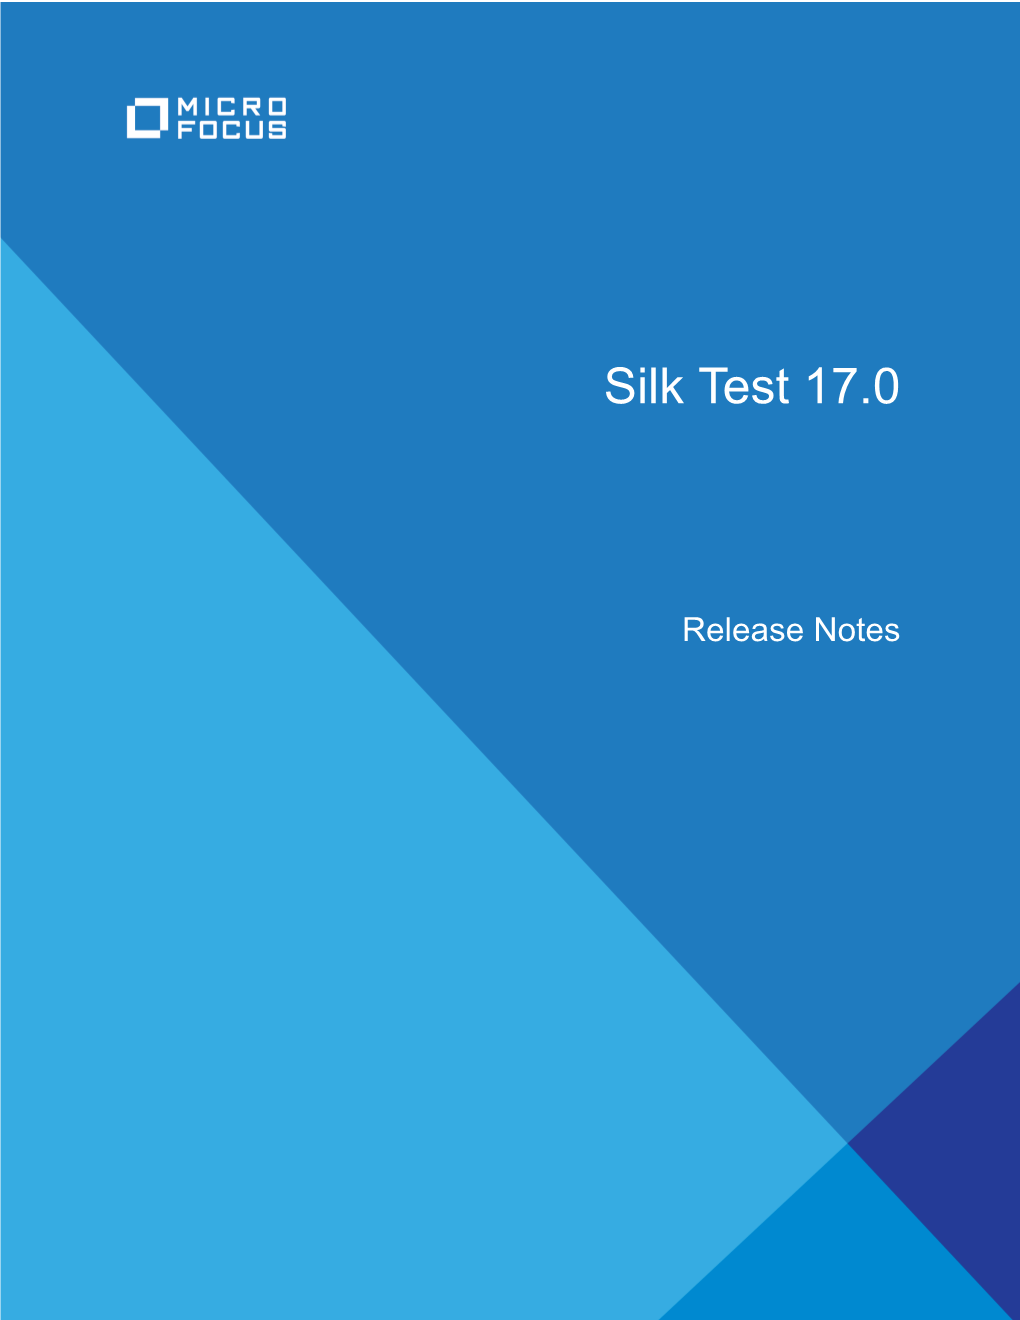 Silk Test 17.0 Release Notes